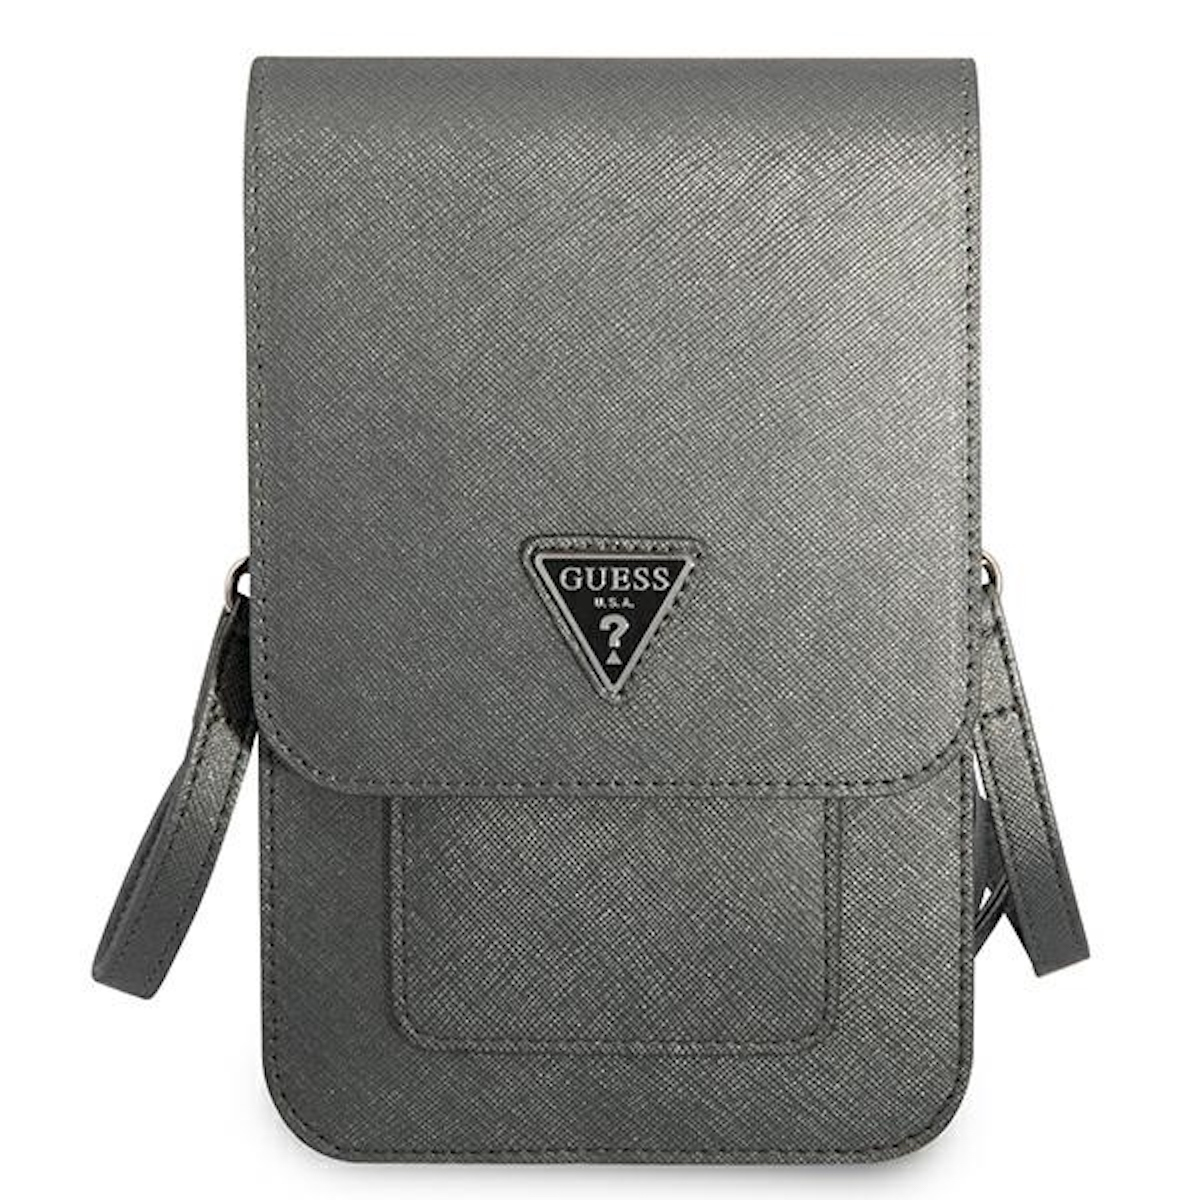 Grau Tasche, Umhängetasche, Universelle Triangle Universell, GUESS Full Cover, Saffiano